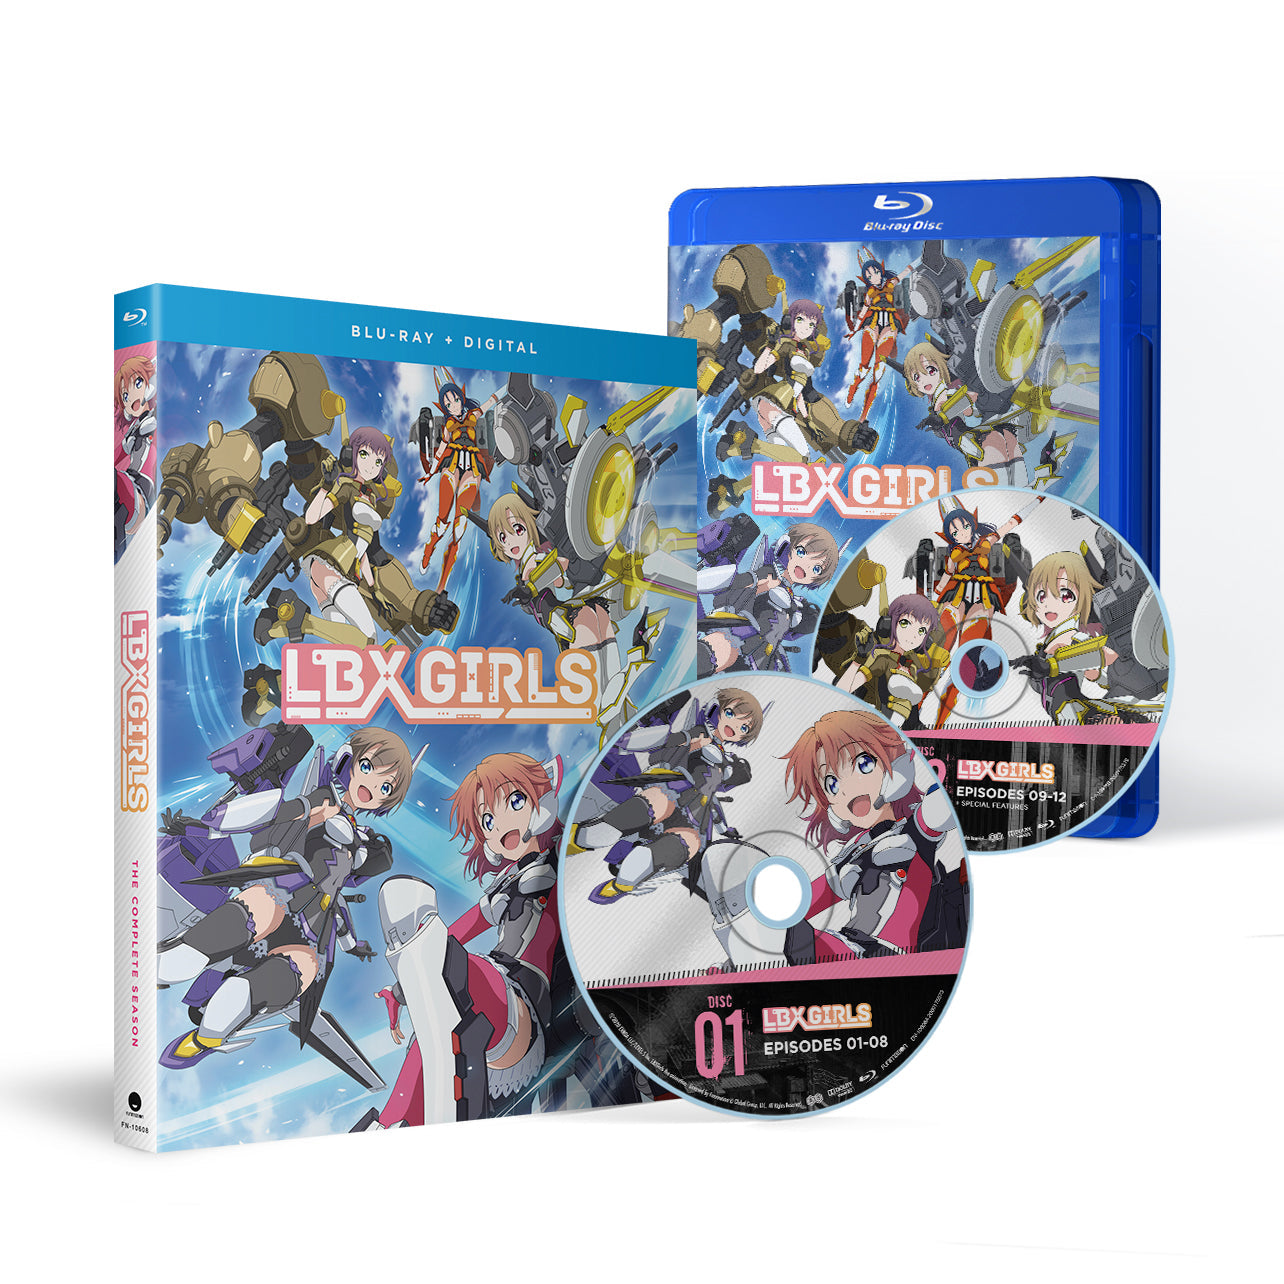 LBX Girls - The Complete Season - Blu-ray image count 0